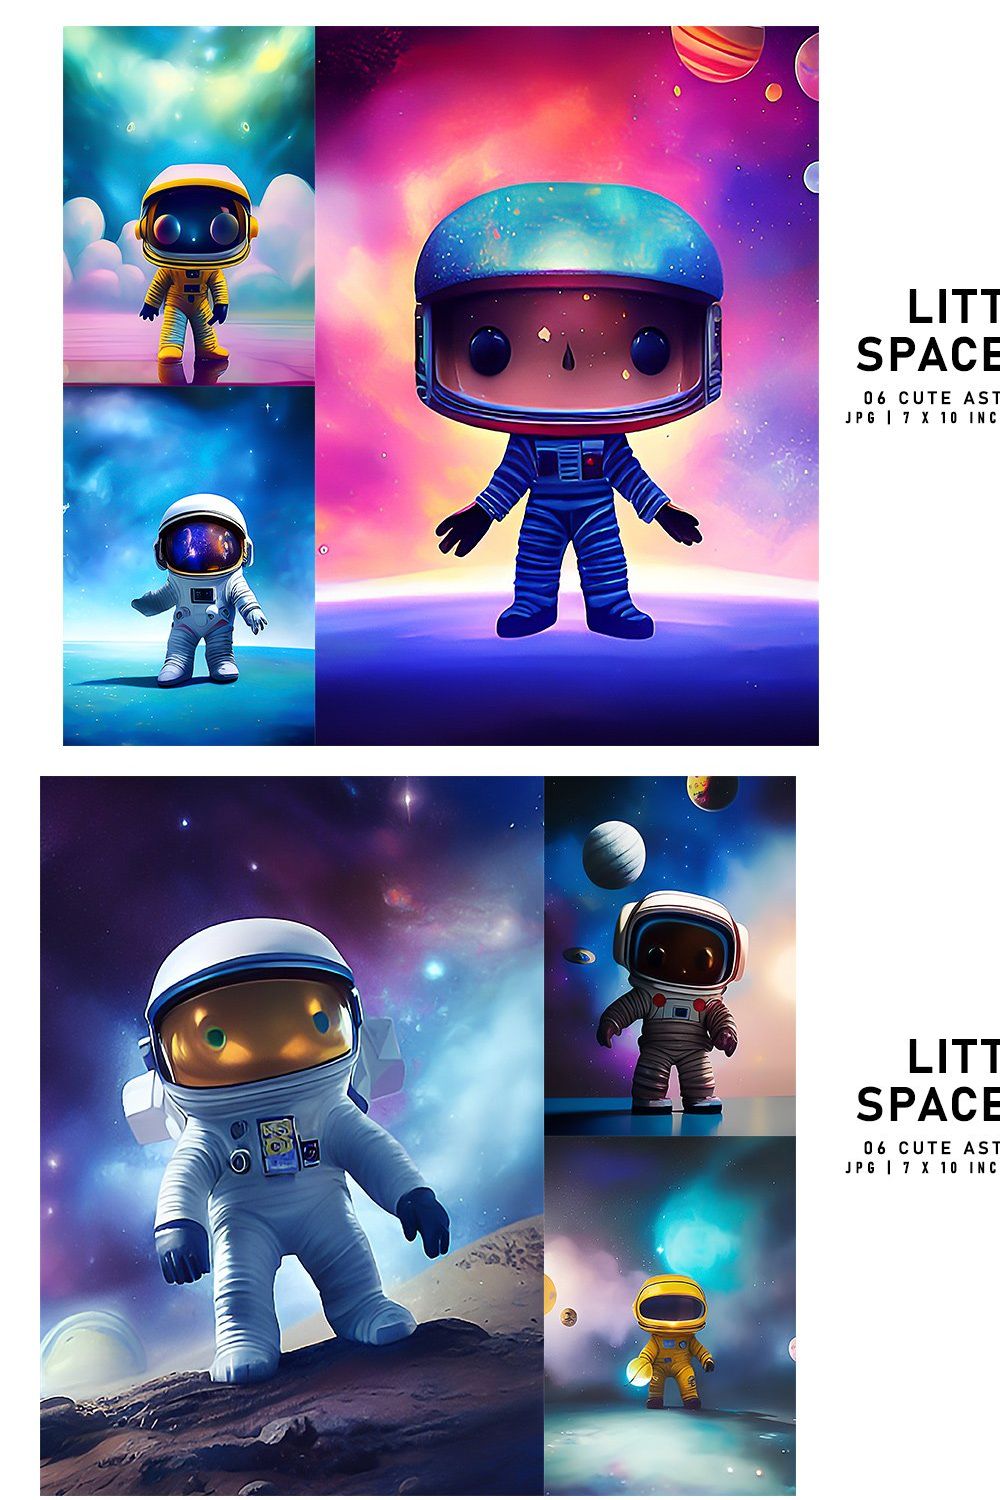 Little Spaceman pinterest preview image.